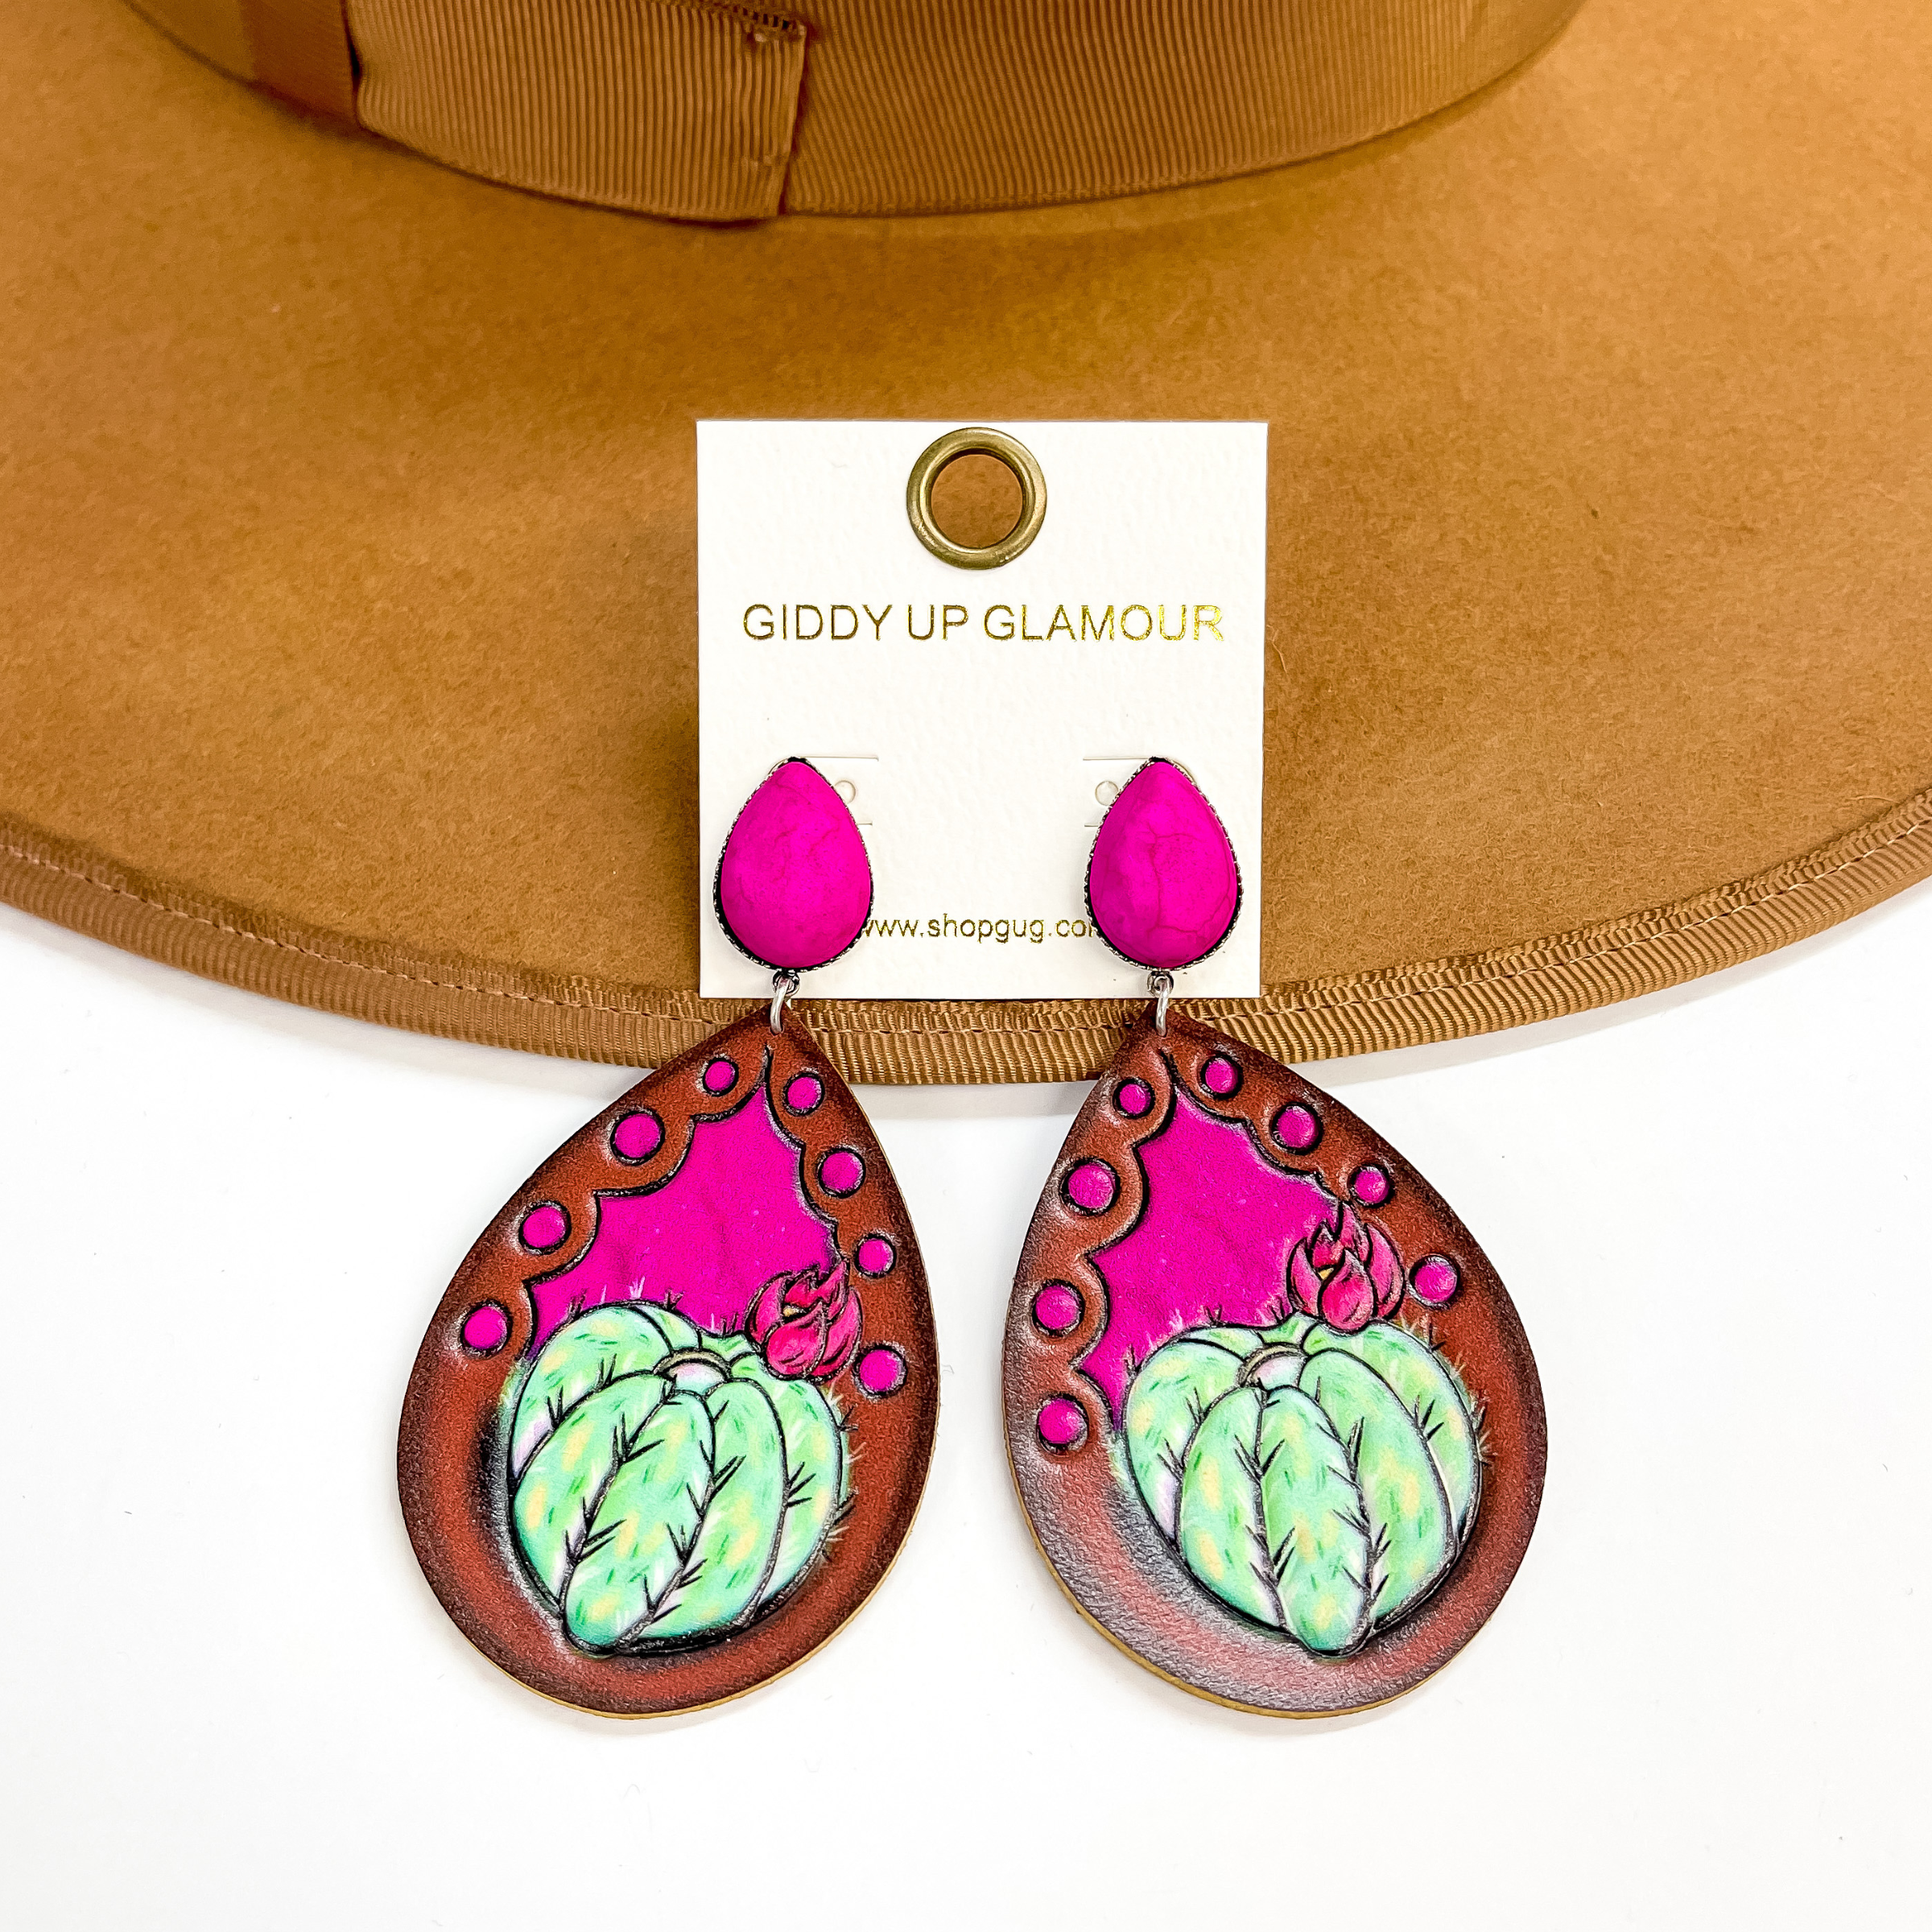 These are hot pink teardrop stone earrings in a  silver setting with a brown leather teardrop. The teardrop has a small green catucs with a pink  flower in a hot pink background. These earrings are  taken on a brown hat brim and a white background.